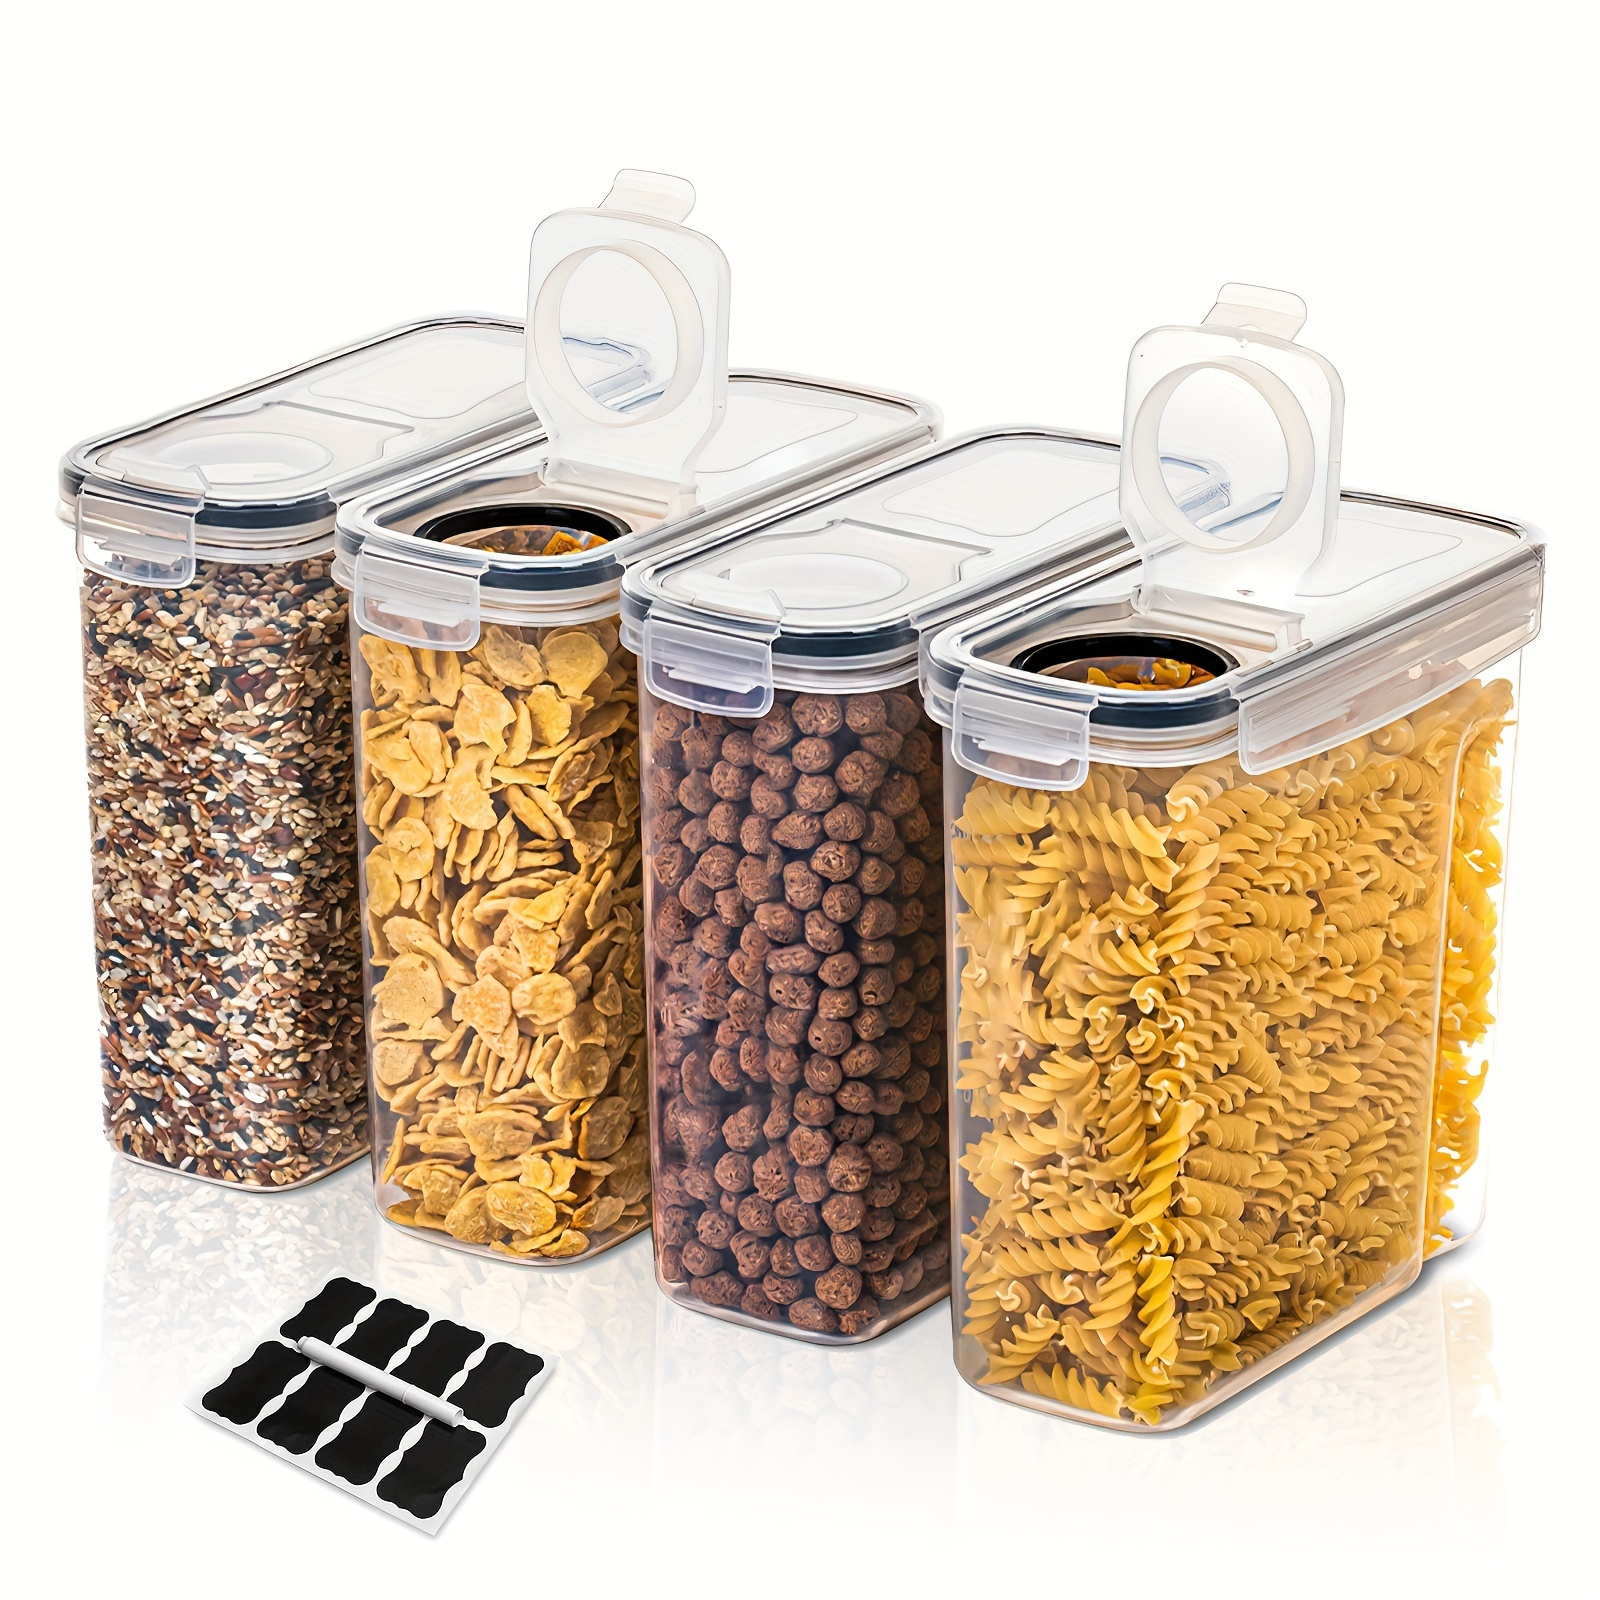 

1pc/2pcs3pcs Ultimate Freshness 4-pack: Bpa-free, Airtight Cereal Storage Containers, 2.5l - Includes Chalkboard Labels, Black